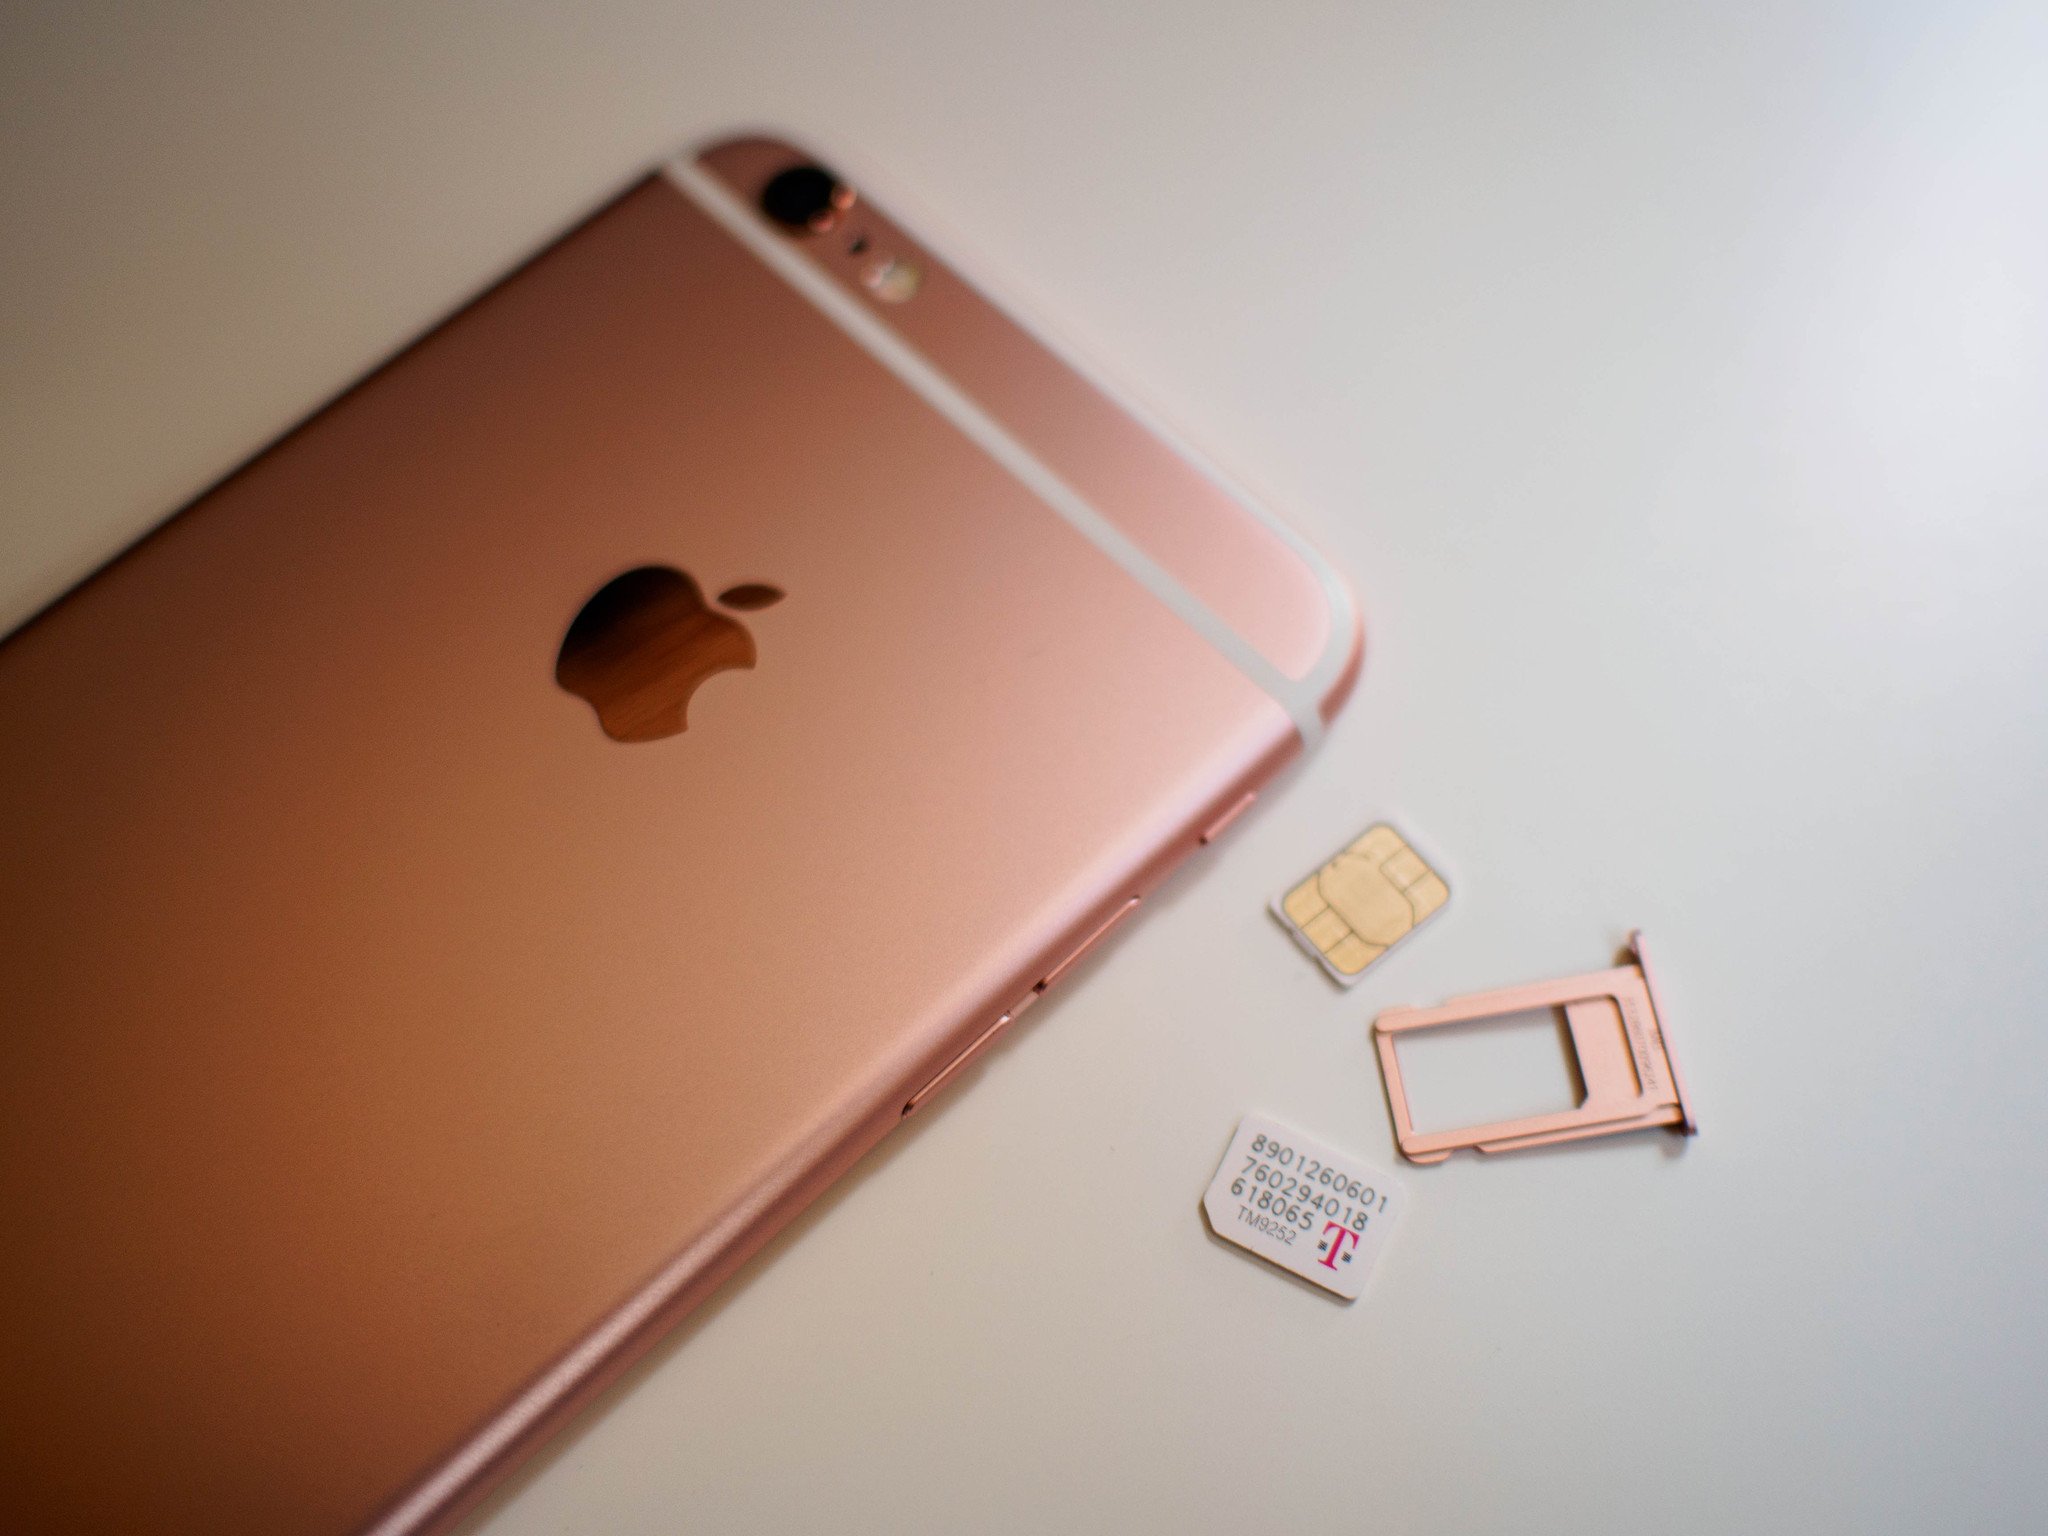 Understanding The Contents Of An IPhone SIM Card